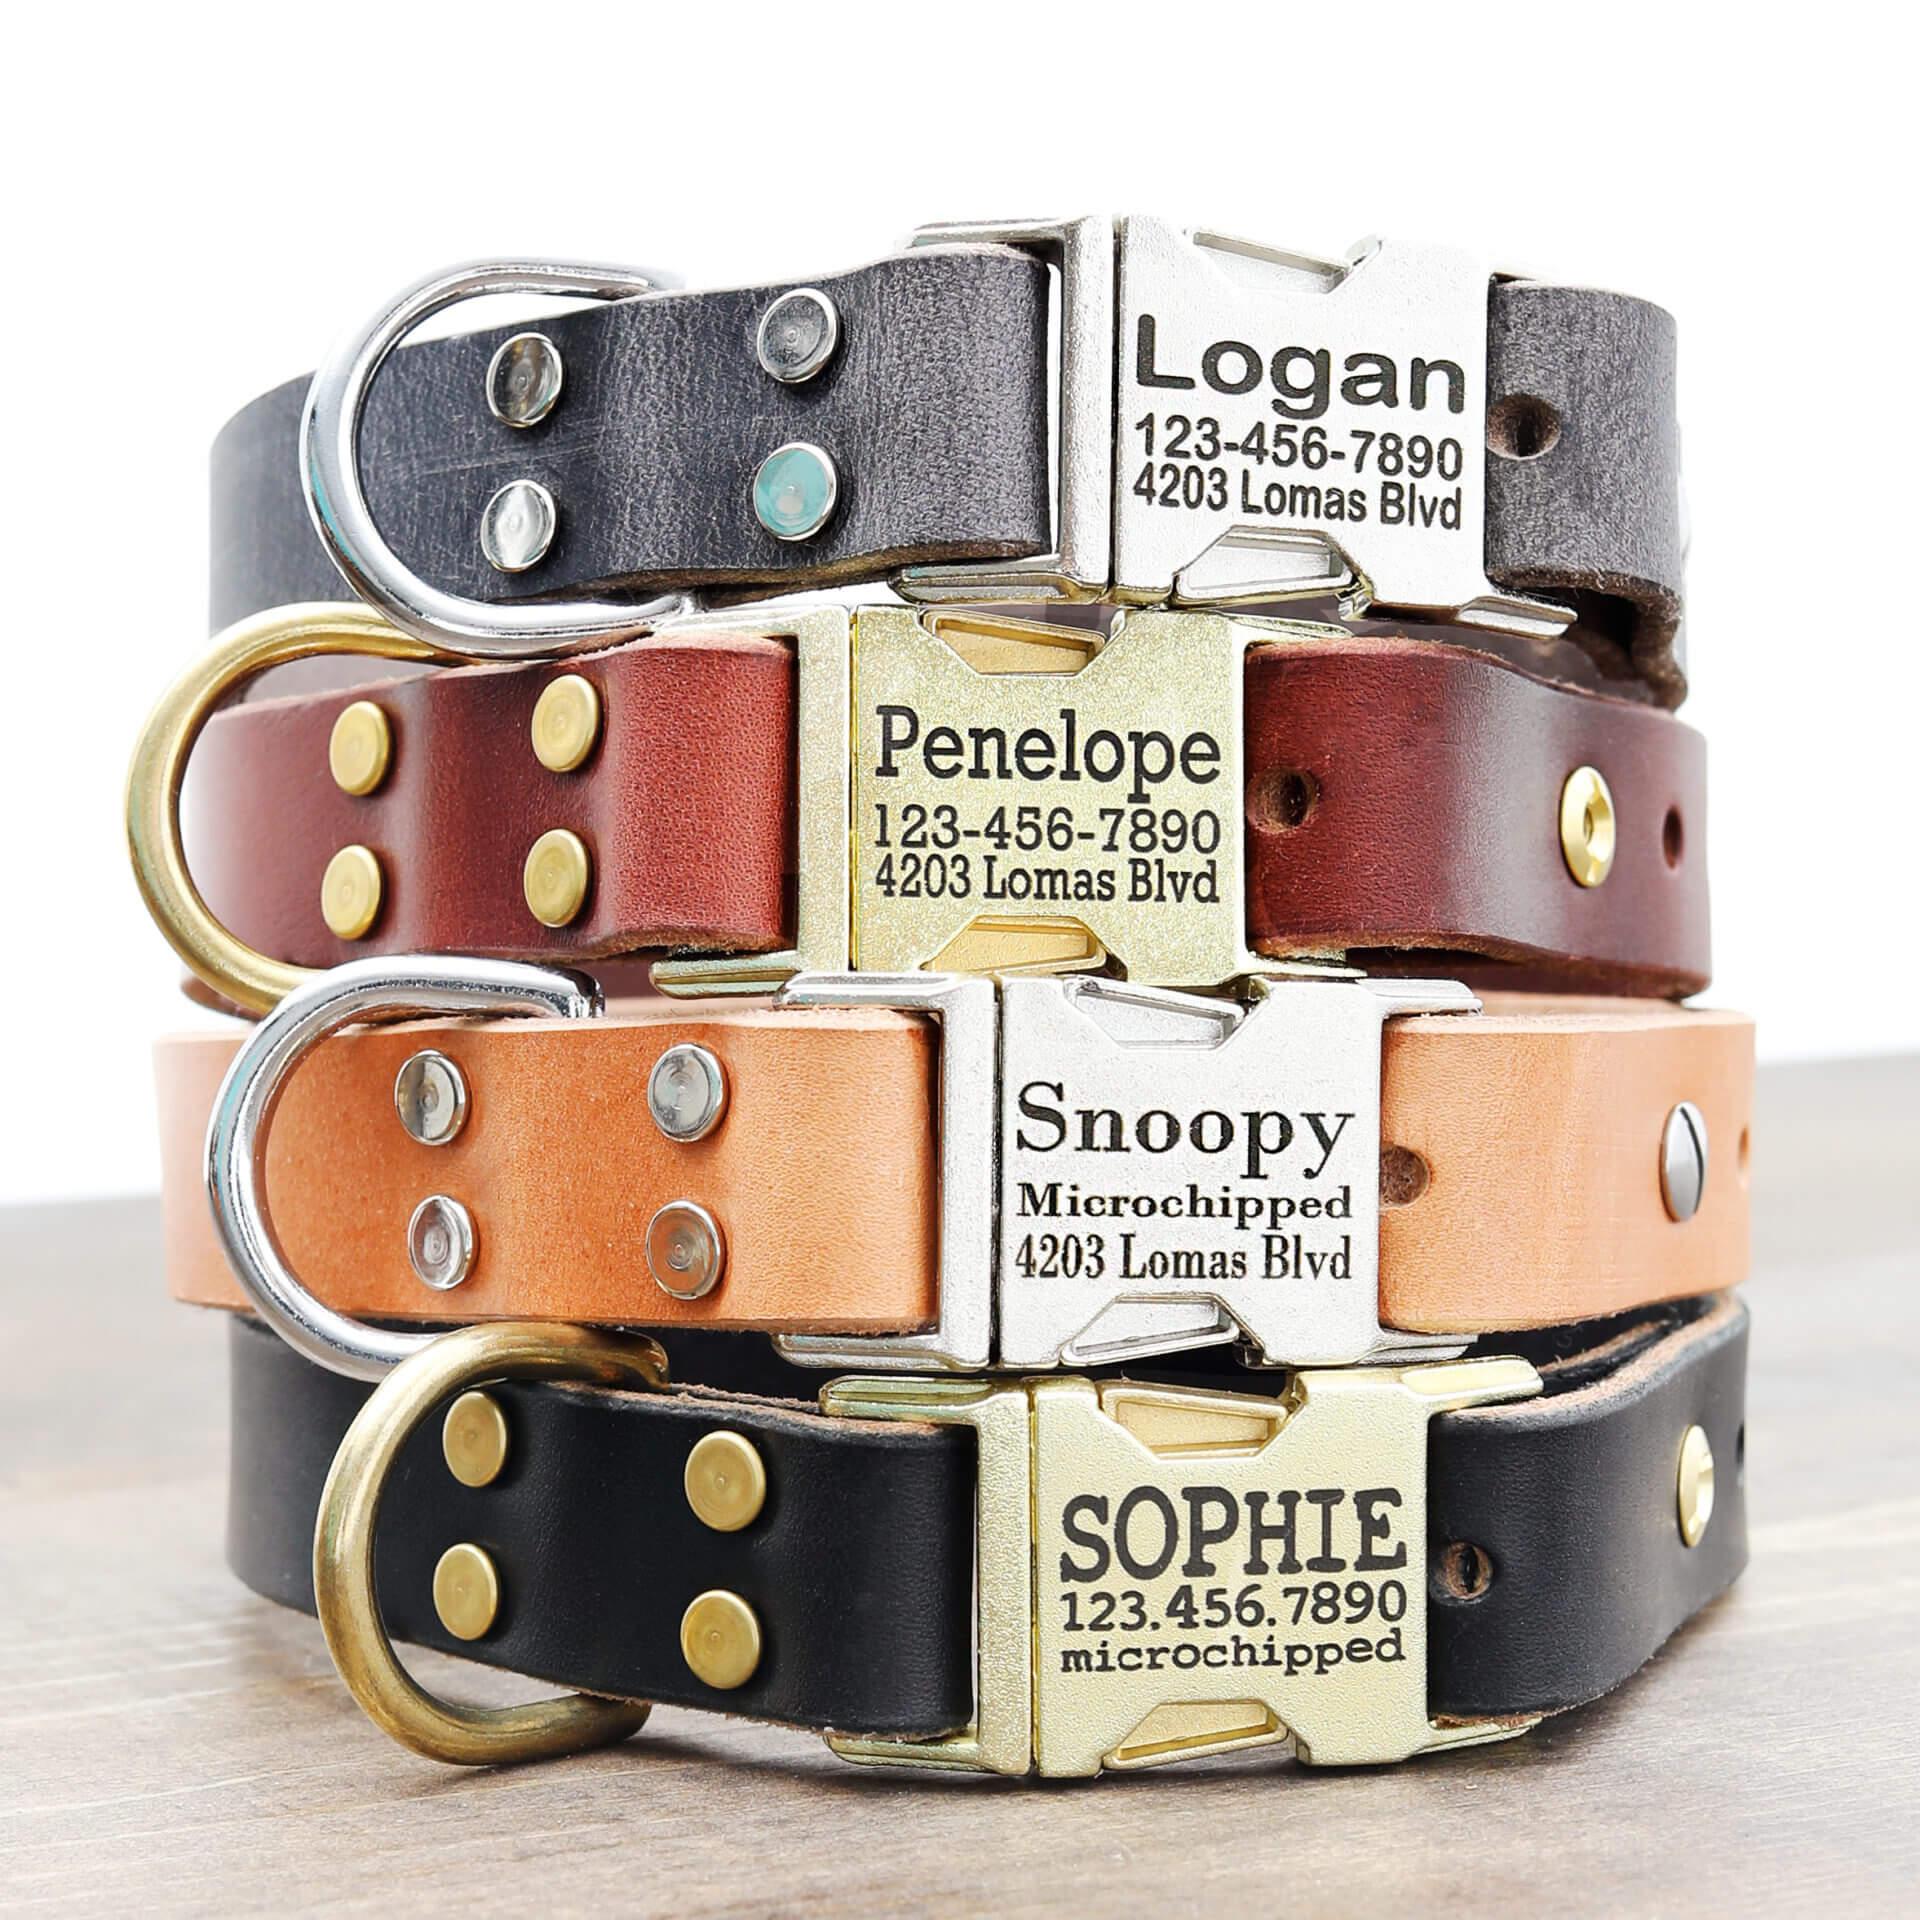 Collar - The Classic High Quality Leather Pet Collar